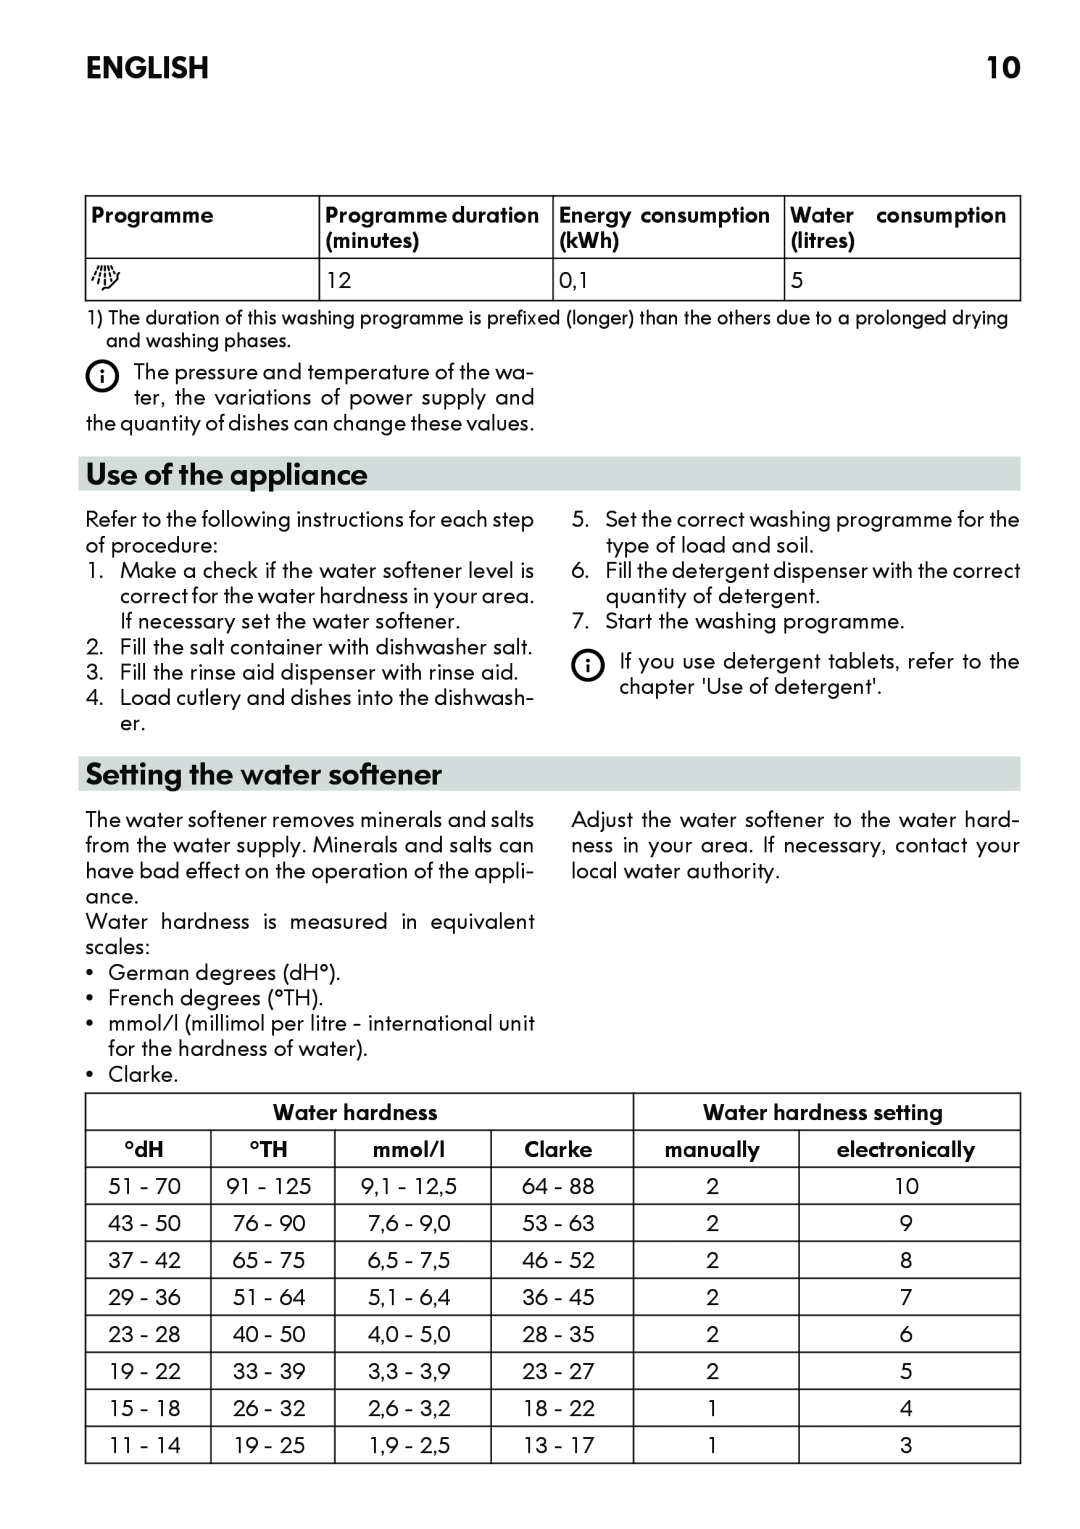 IKEA DW60 manual Use of the appliance, Setting the water softener, English 